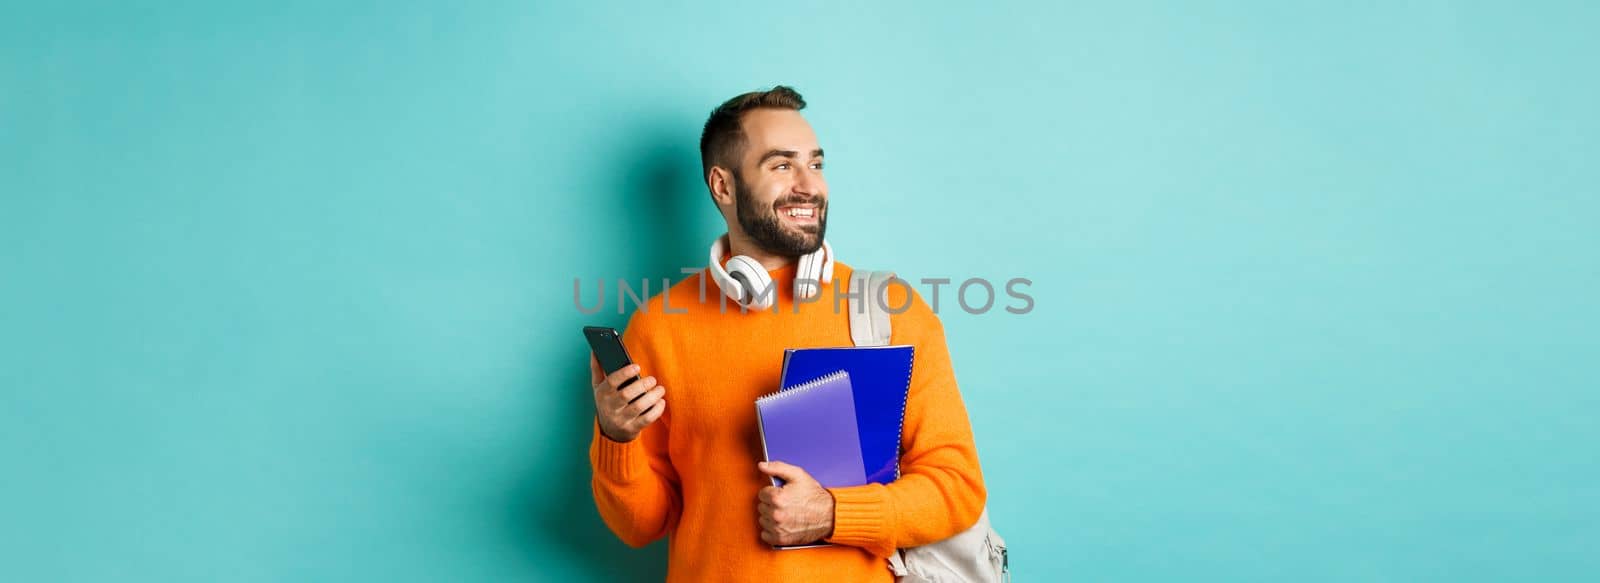 Education. Handsome male student with headphones and backpack, using mobile phone and holding notebooks, smiling happy, standing over turquoise background.